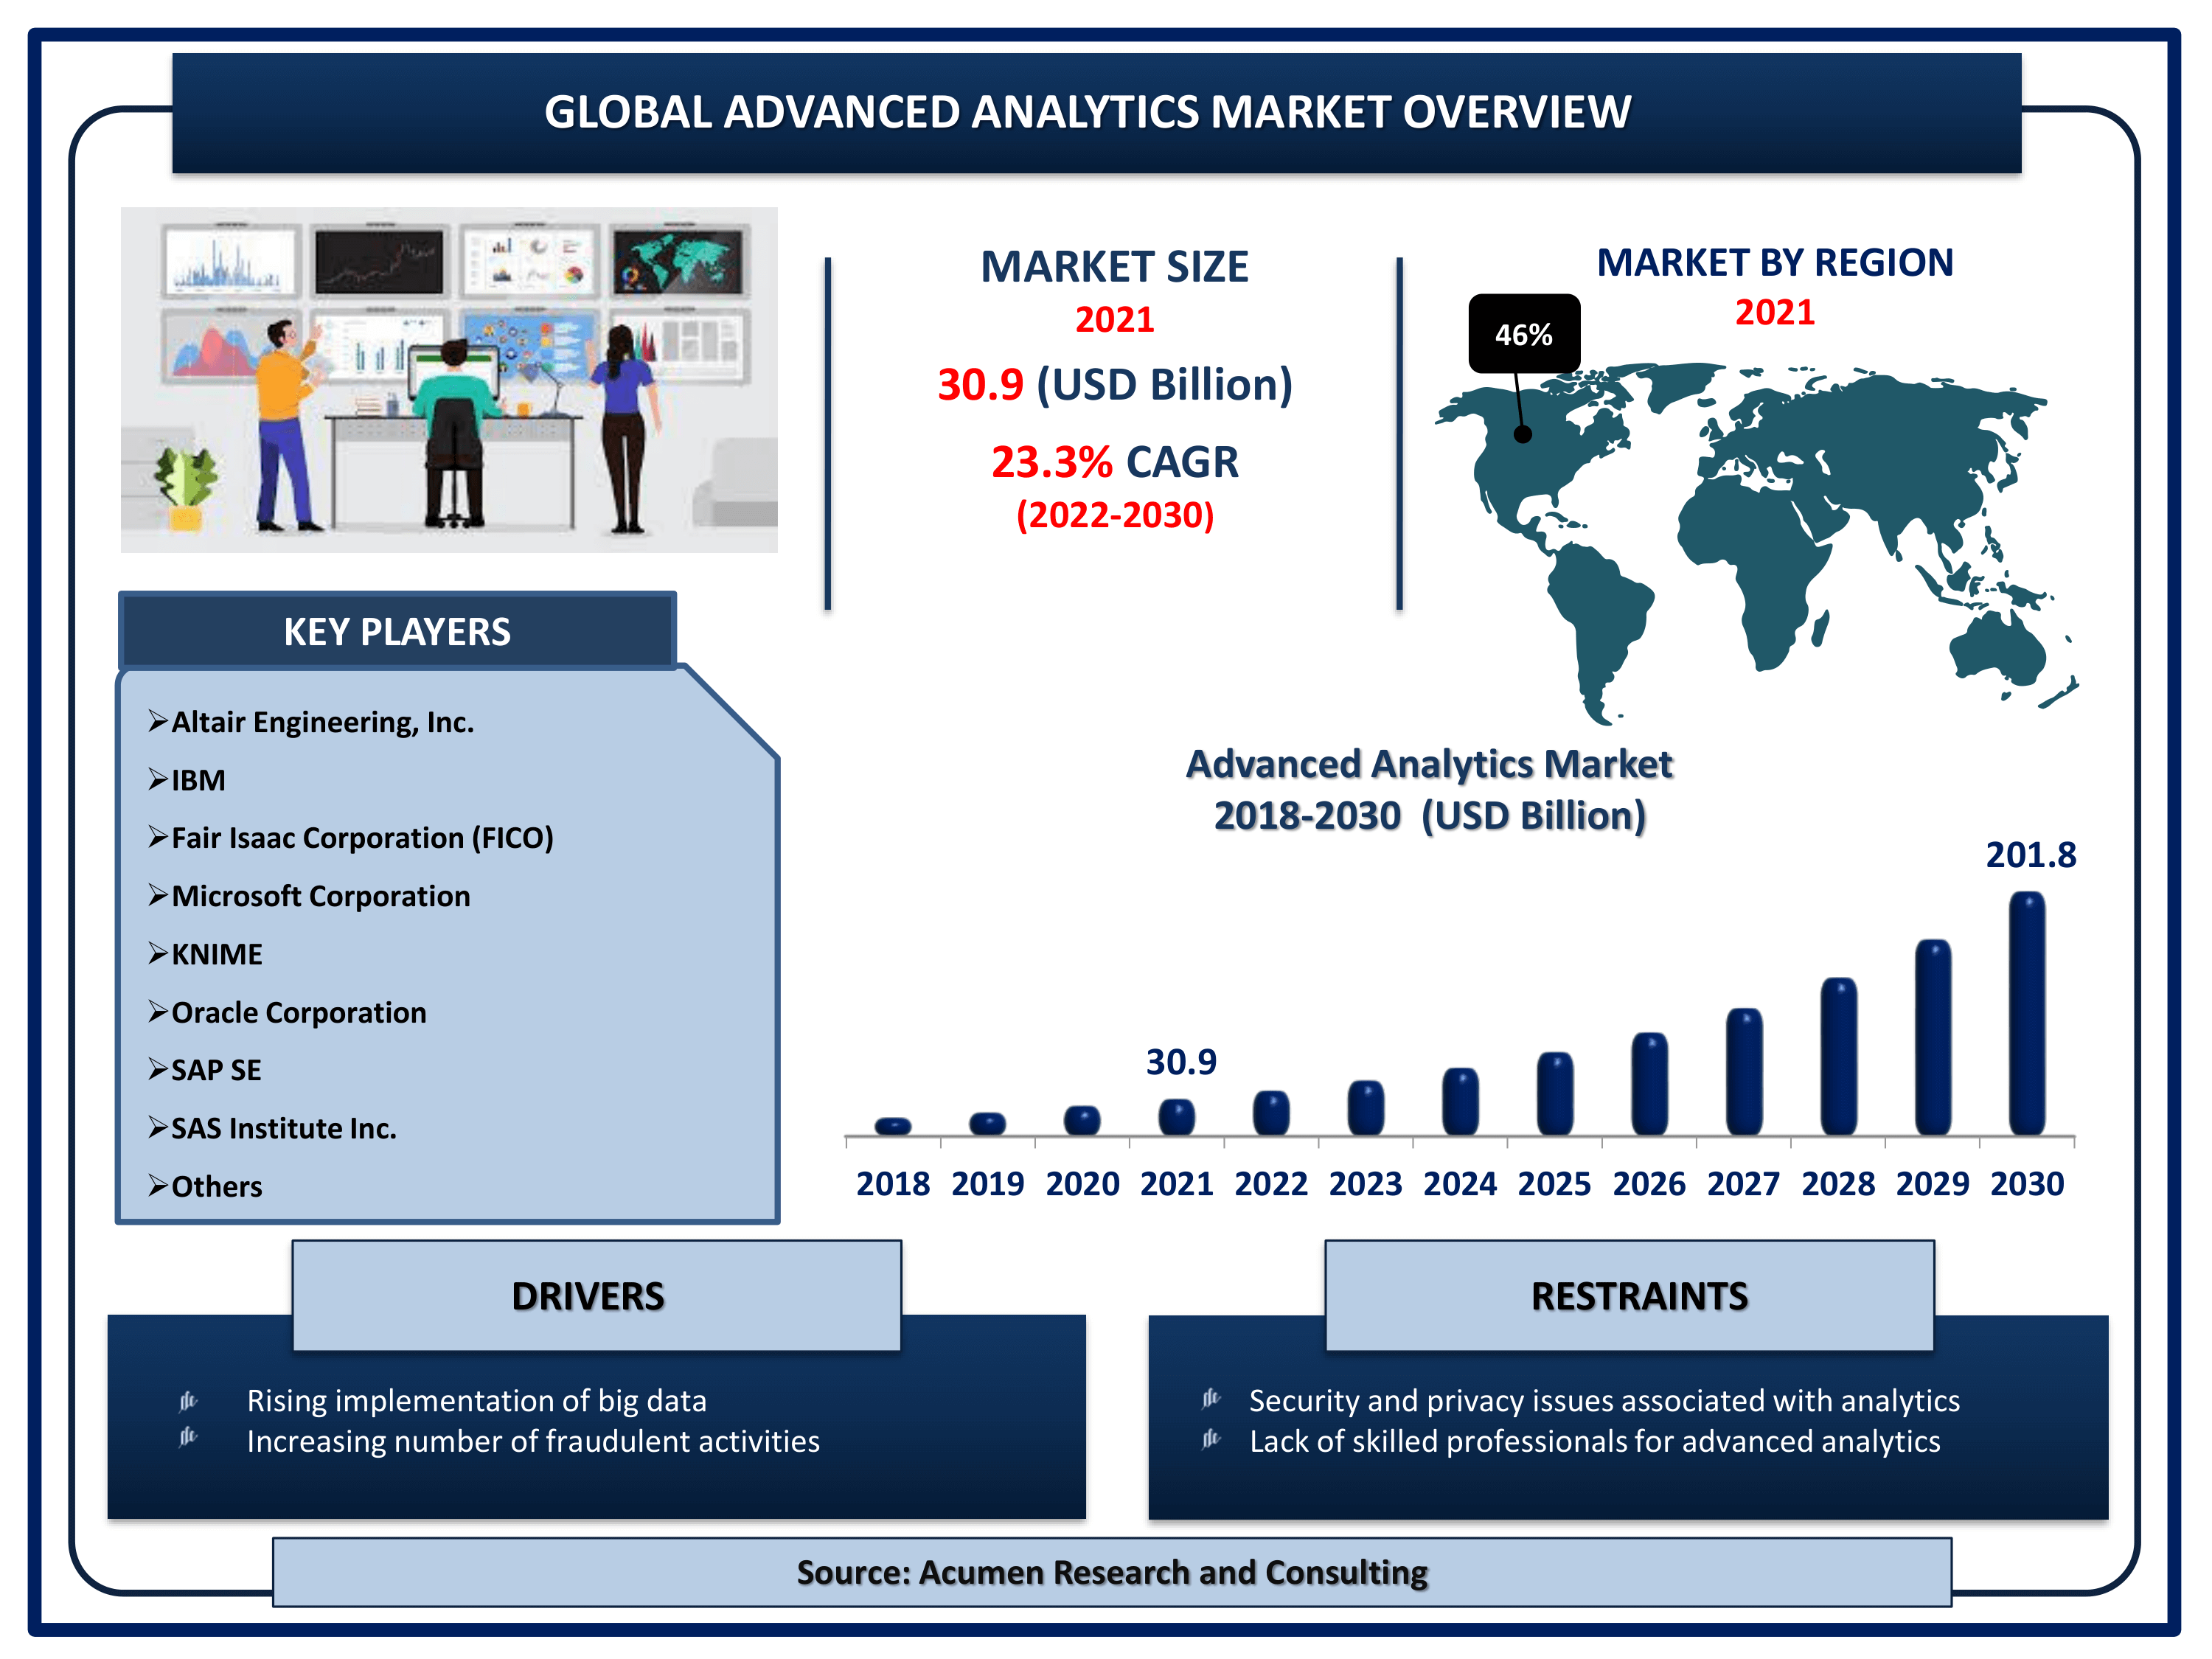 Global advanced analytics market revenue is estimated to reach USD 201.8 Billion by 2030 with a CAGR of 23.3% from 2022 to 2030